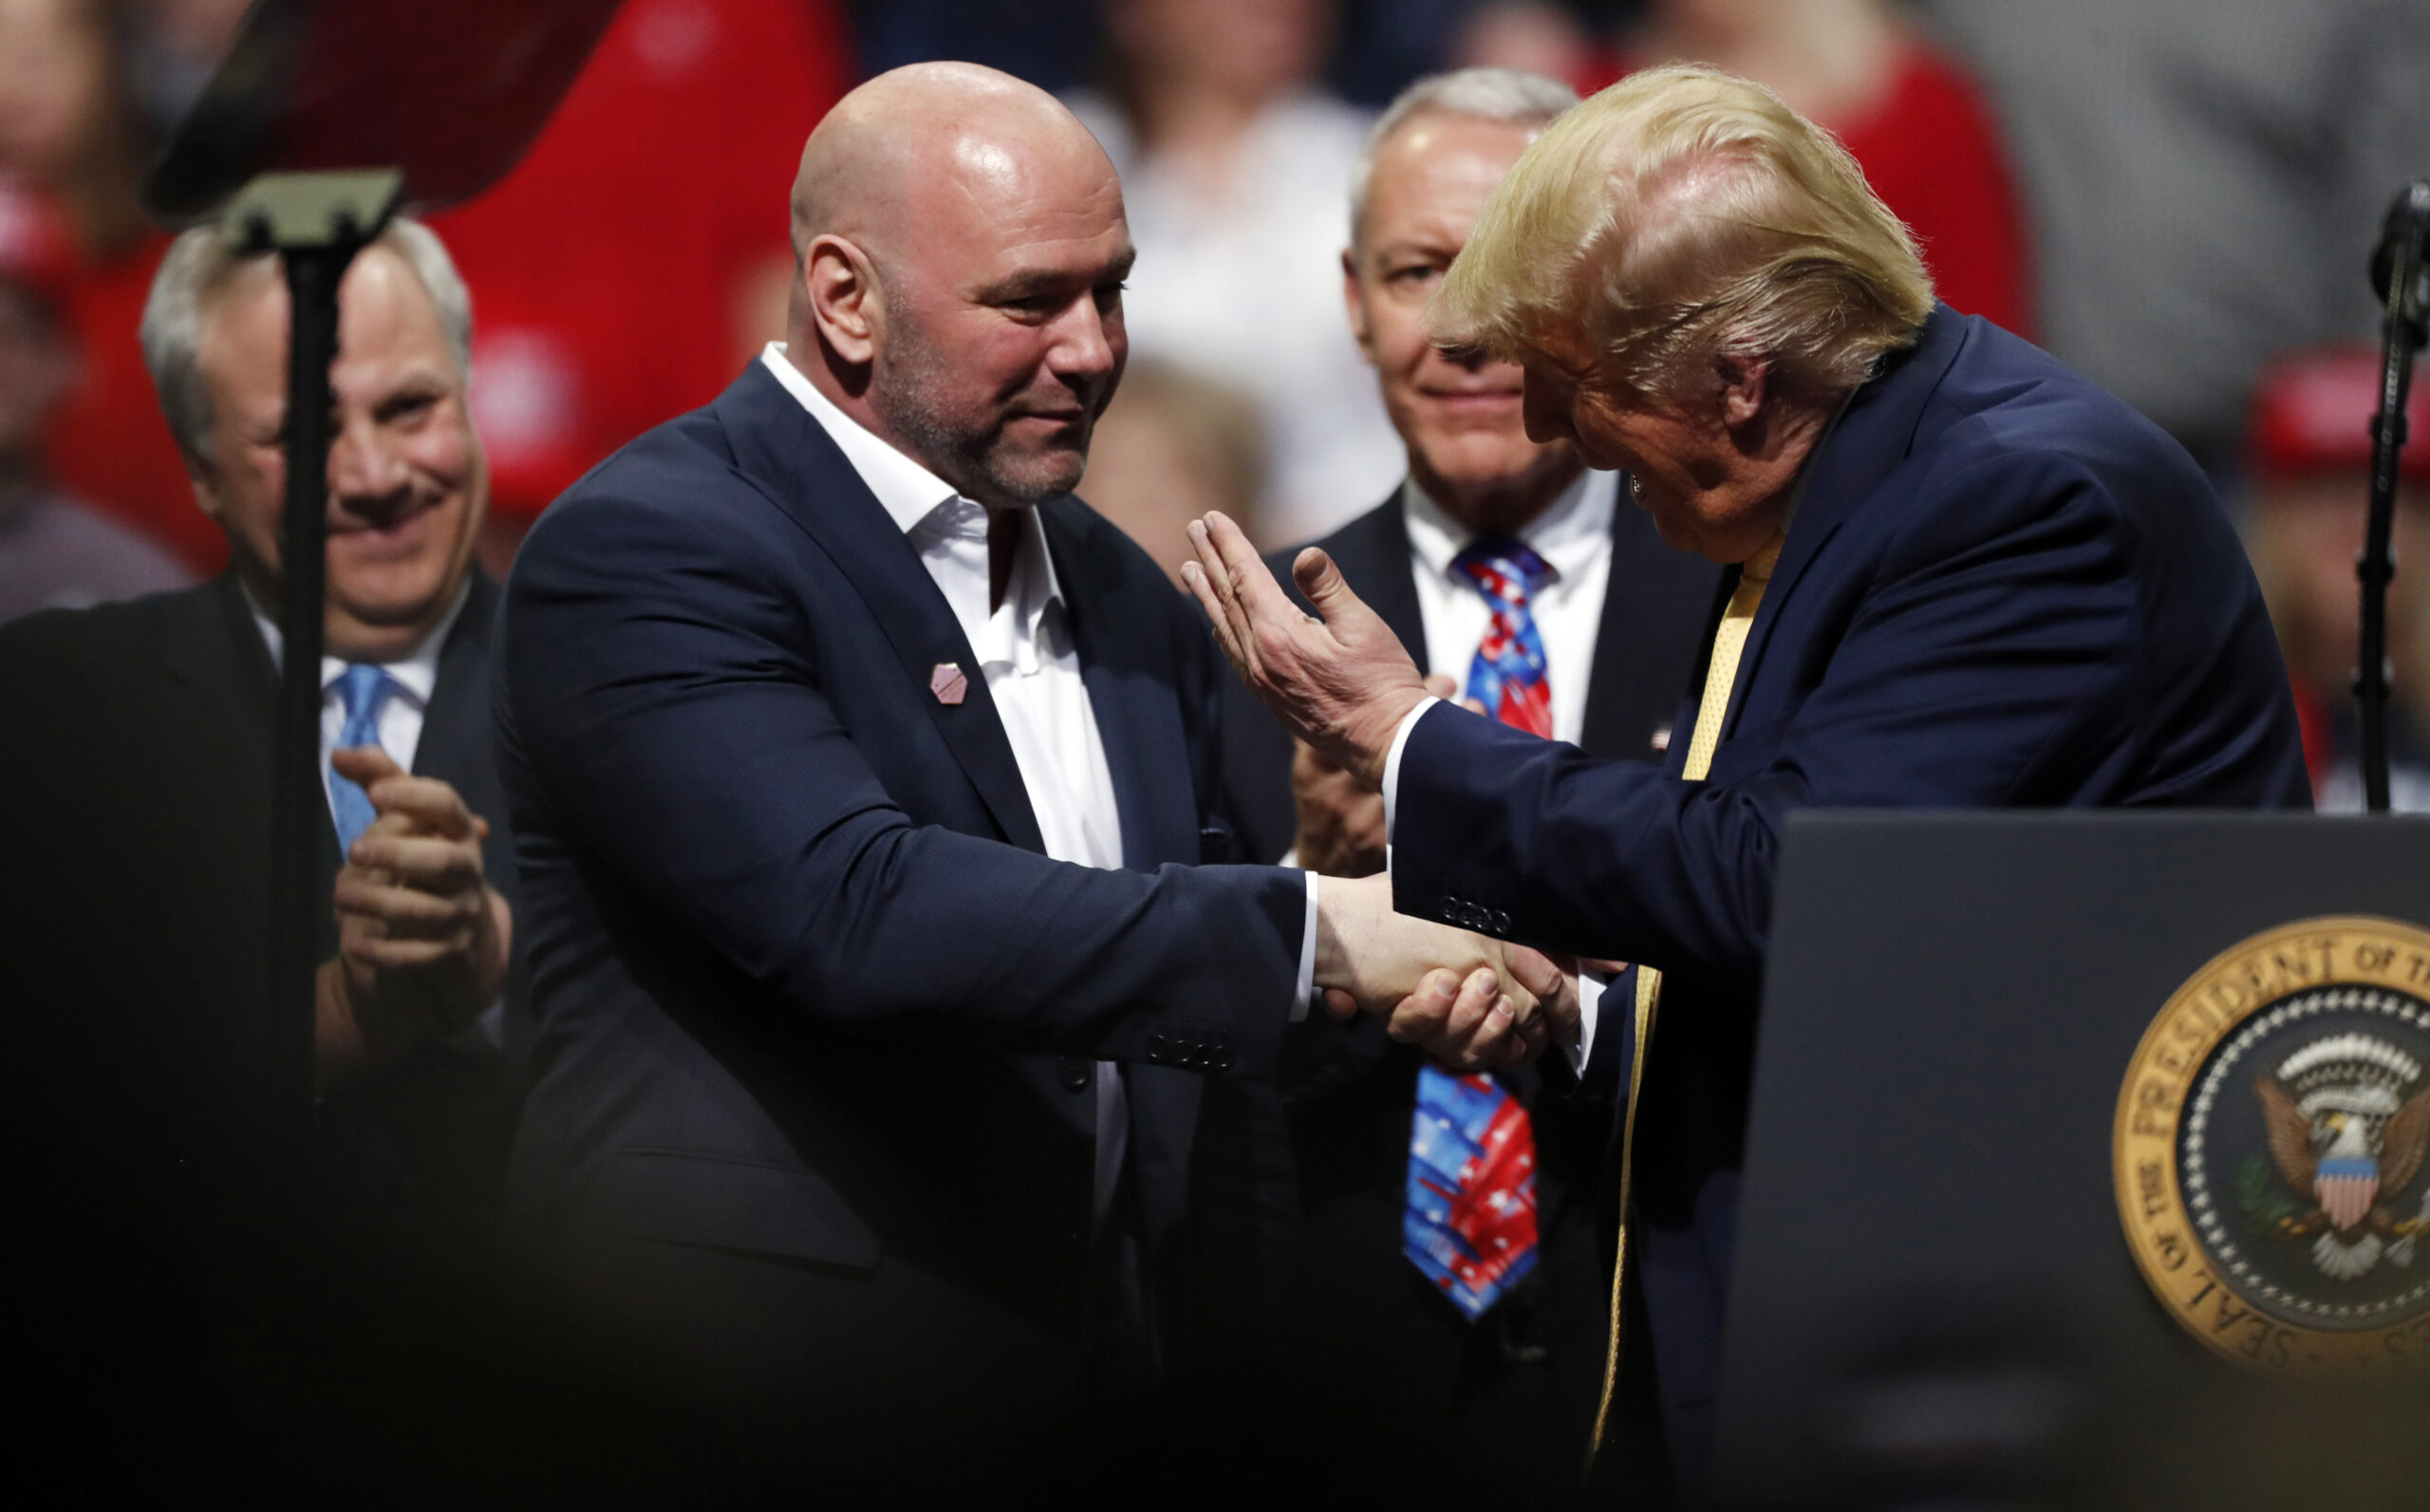 Dana White Is A Long Time Friend Of Donald Trump